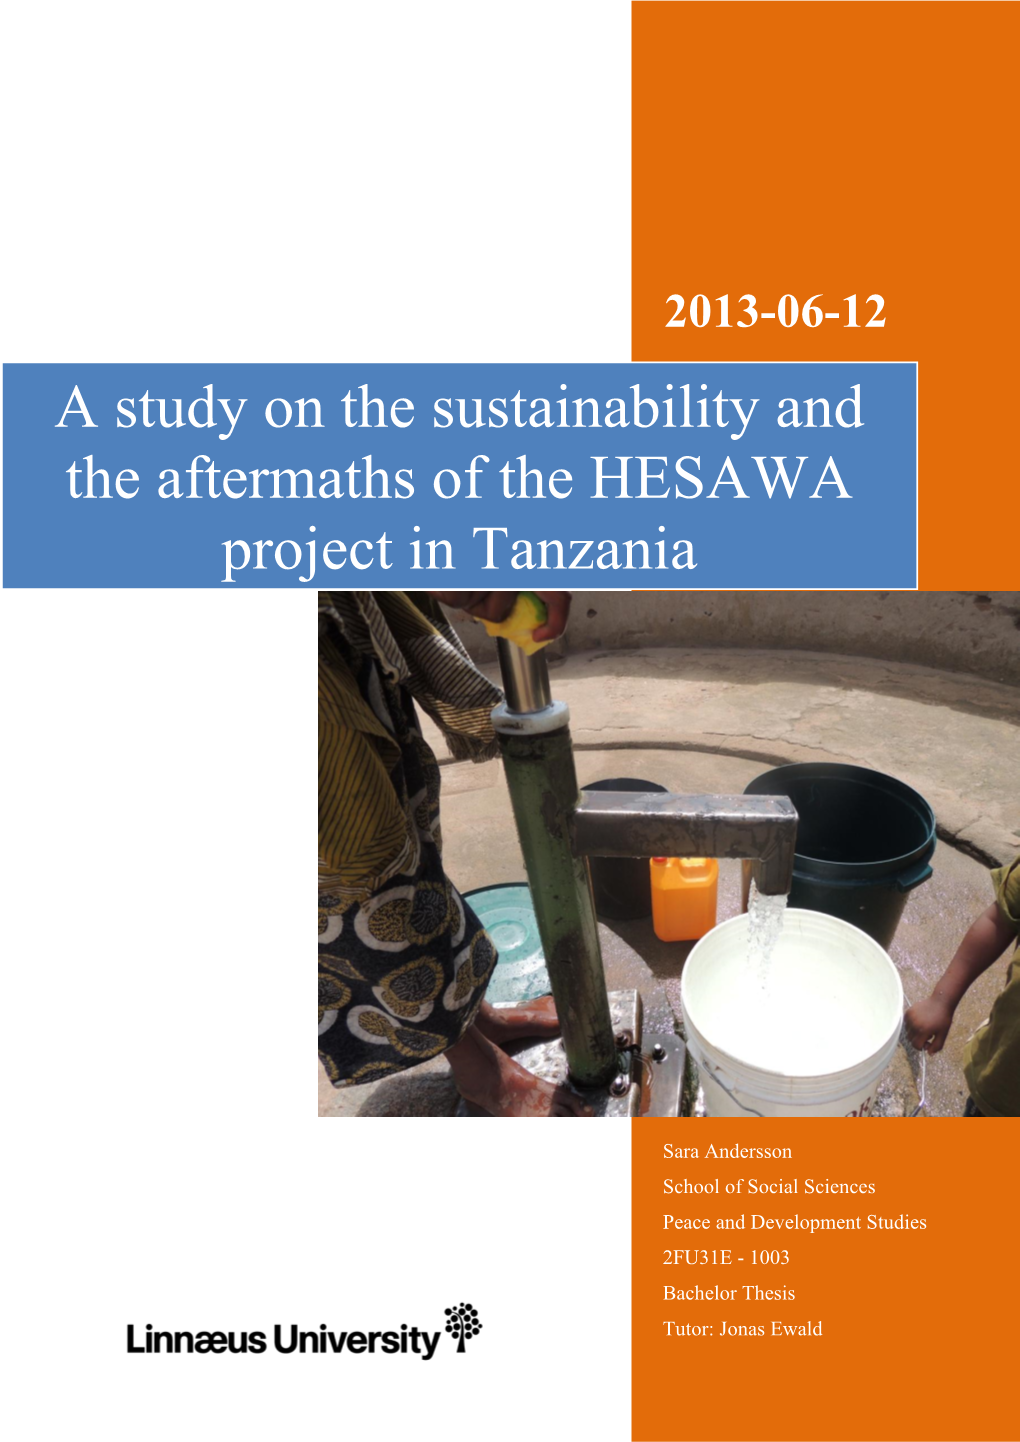 A Study on the Sustainability and the Aftermaths of the HESAWA Project in Tanzania